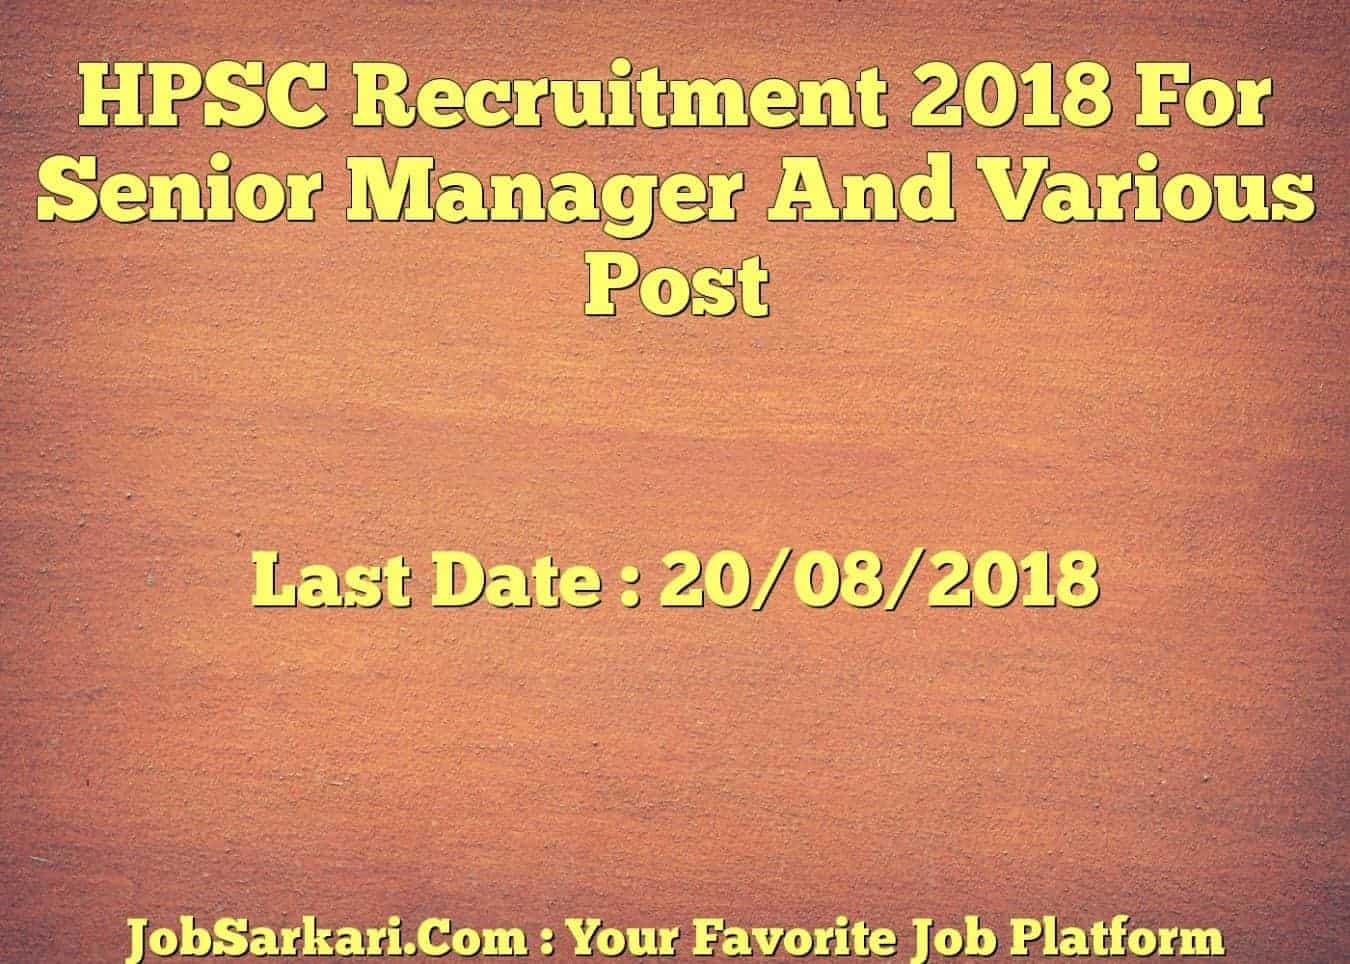 HPSC Recruitment 2018 For Senior Manager And Various Post